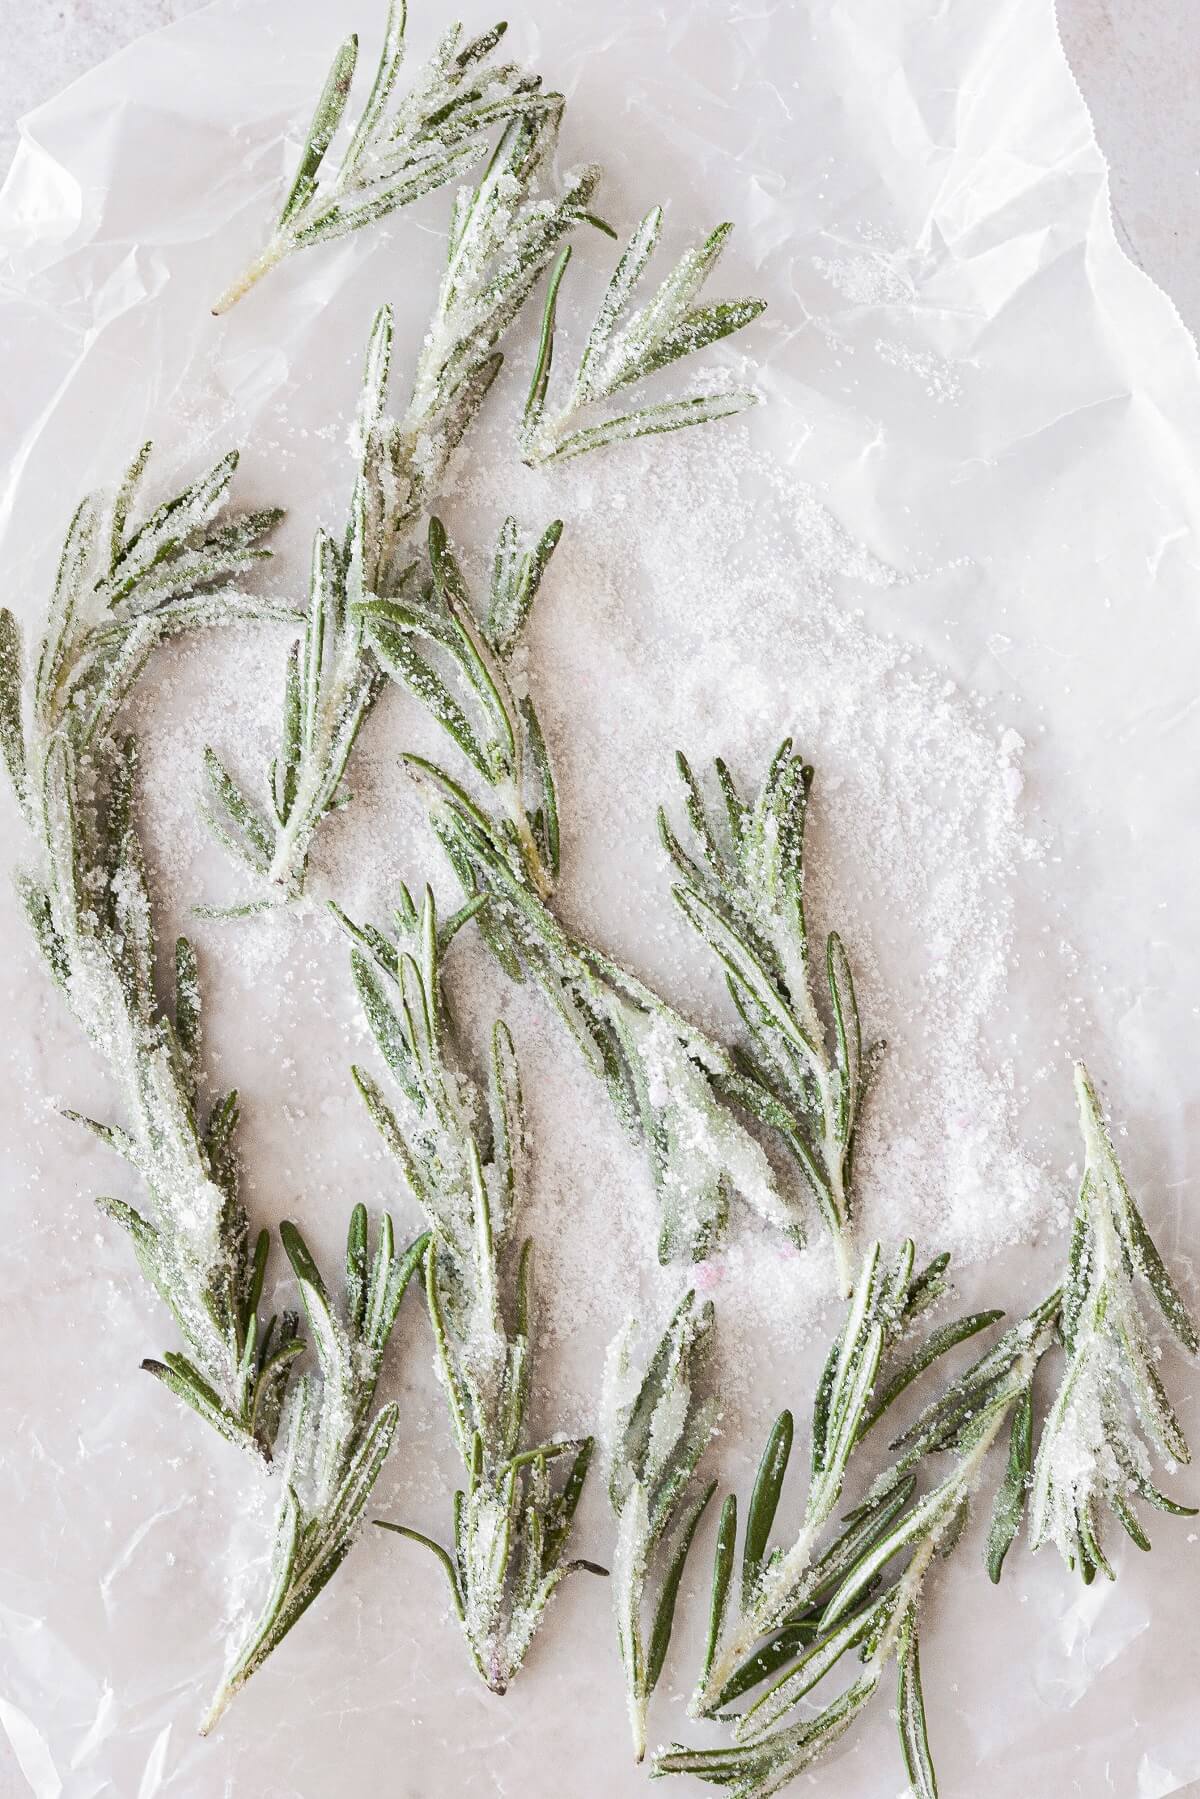 Sprigs of rosemary coated in sugar.